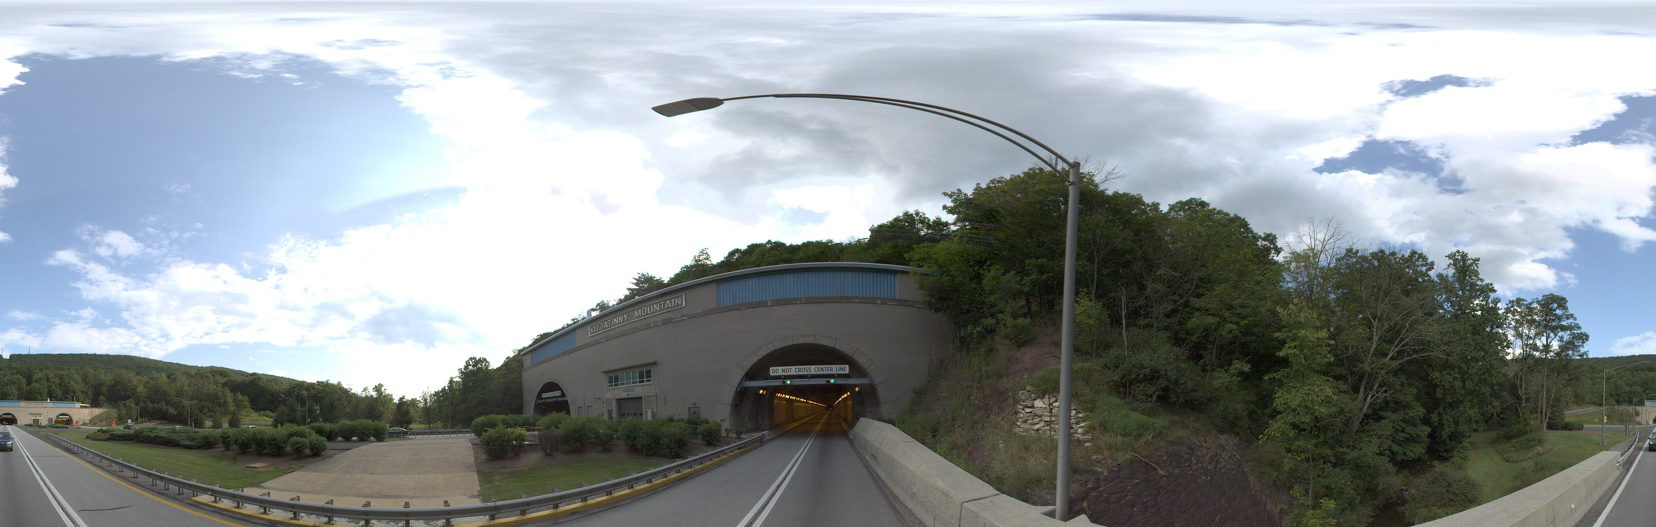 Pennsylvania Turnpike Commission 360 Imagery